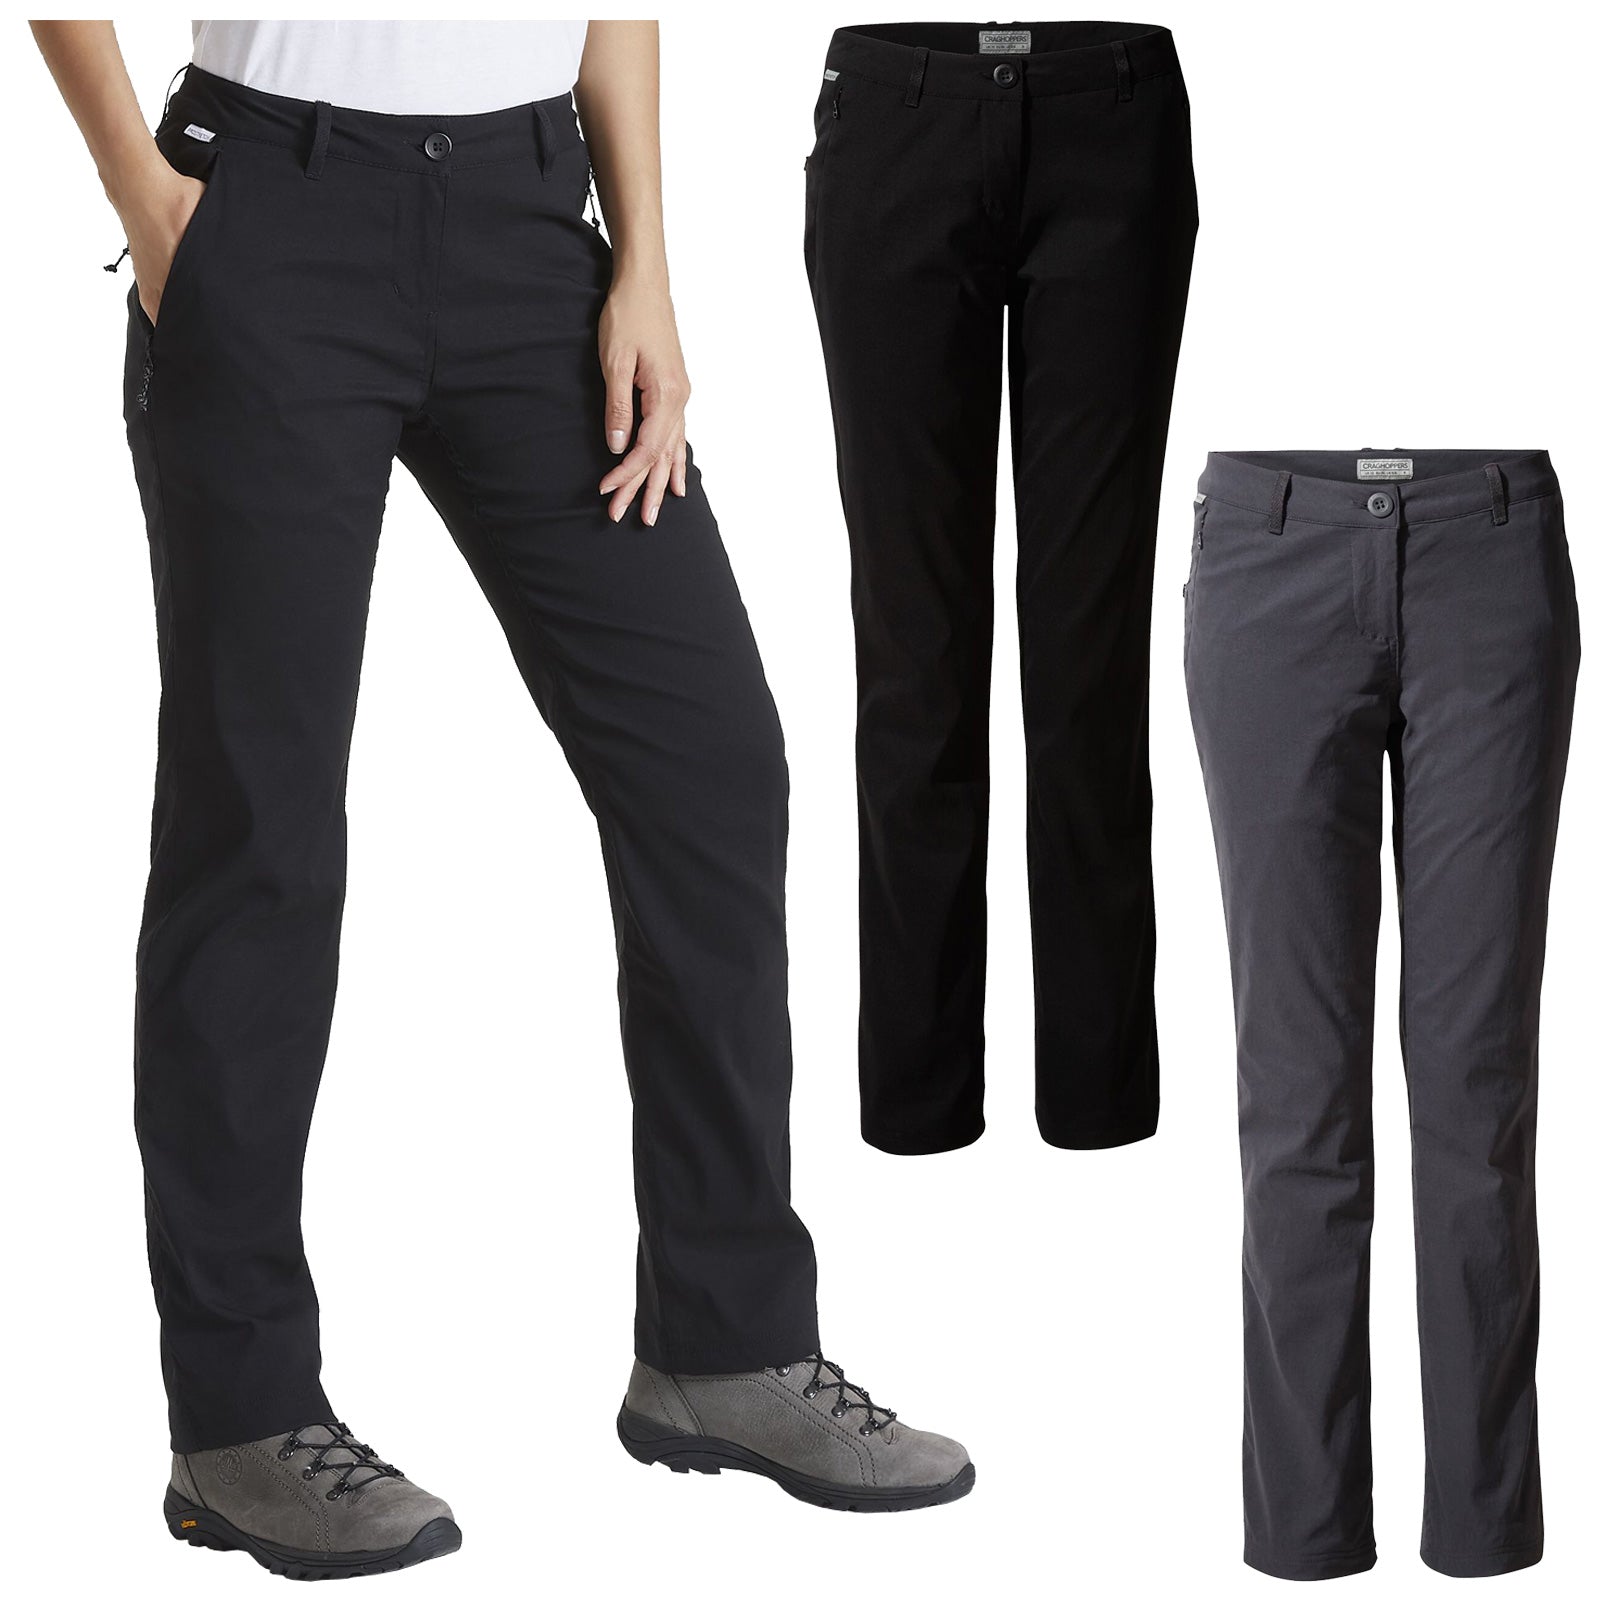 Craghoppers Ladies Kiwi Pro II Winter Lined Trousers